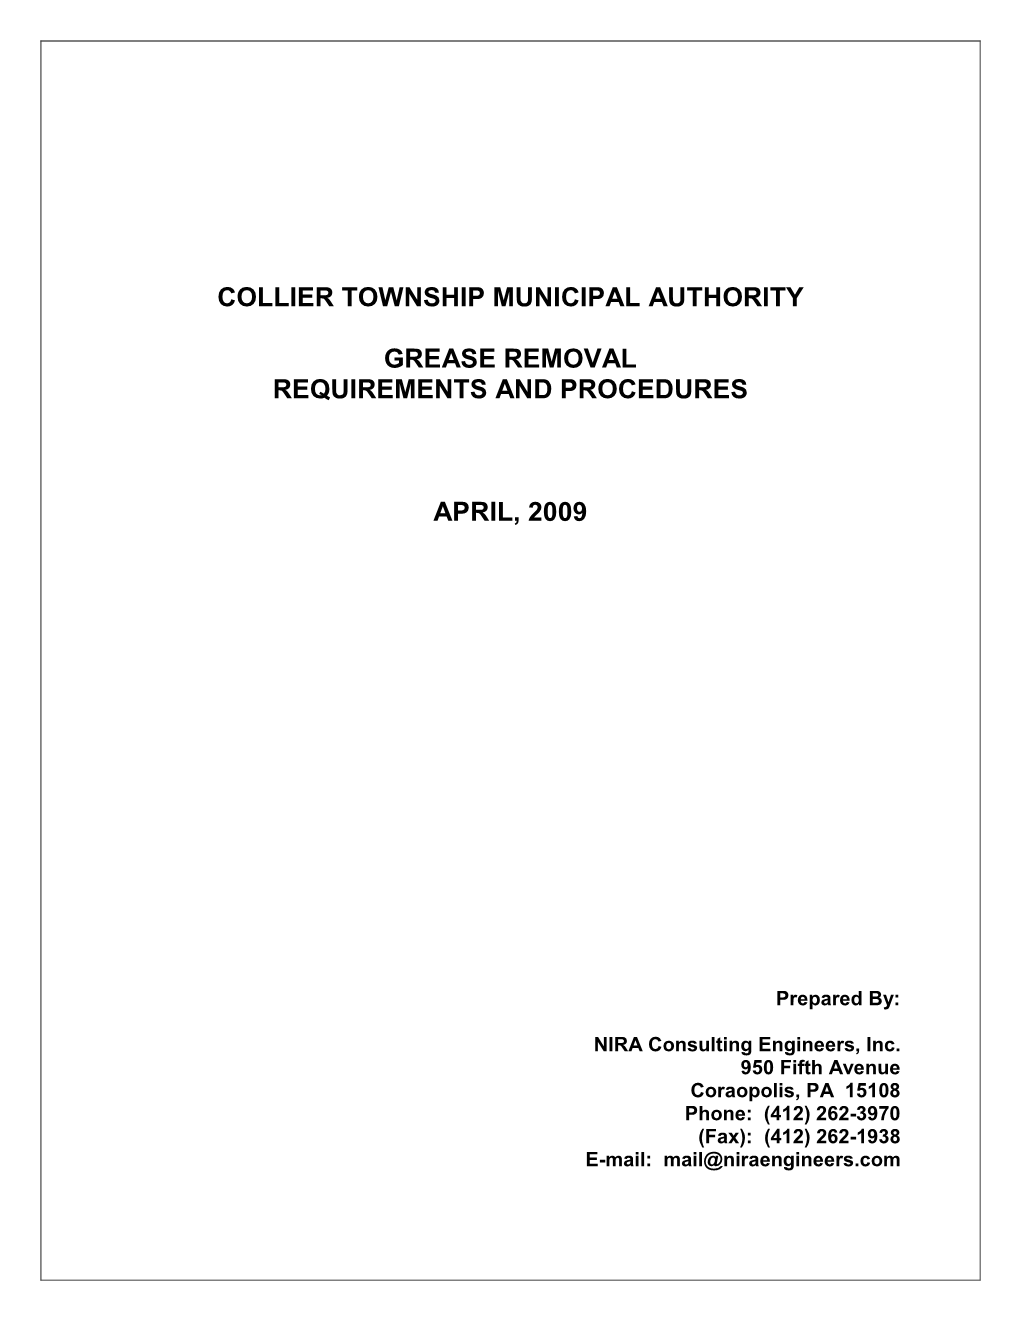 Collier Township Municipal Authority Grease Removal Requirements and Procedures April, 2009